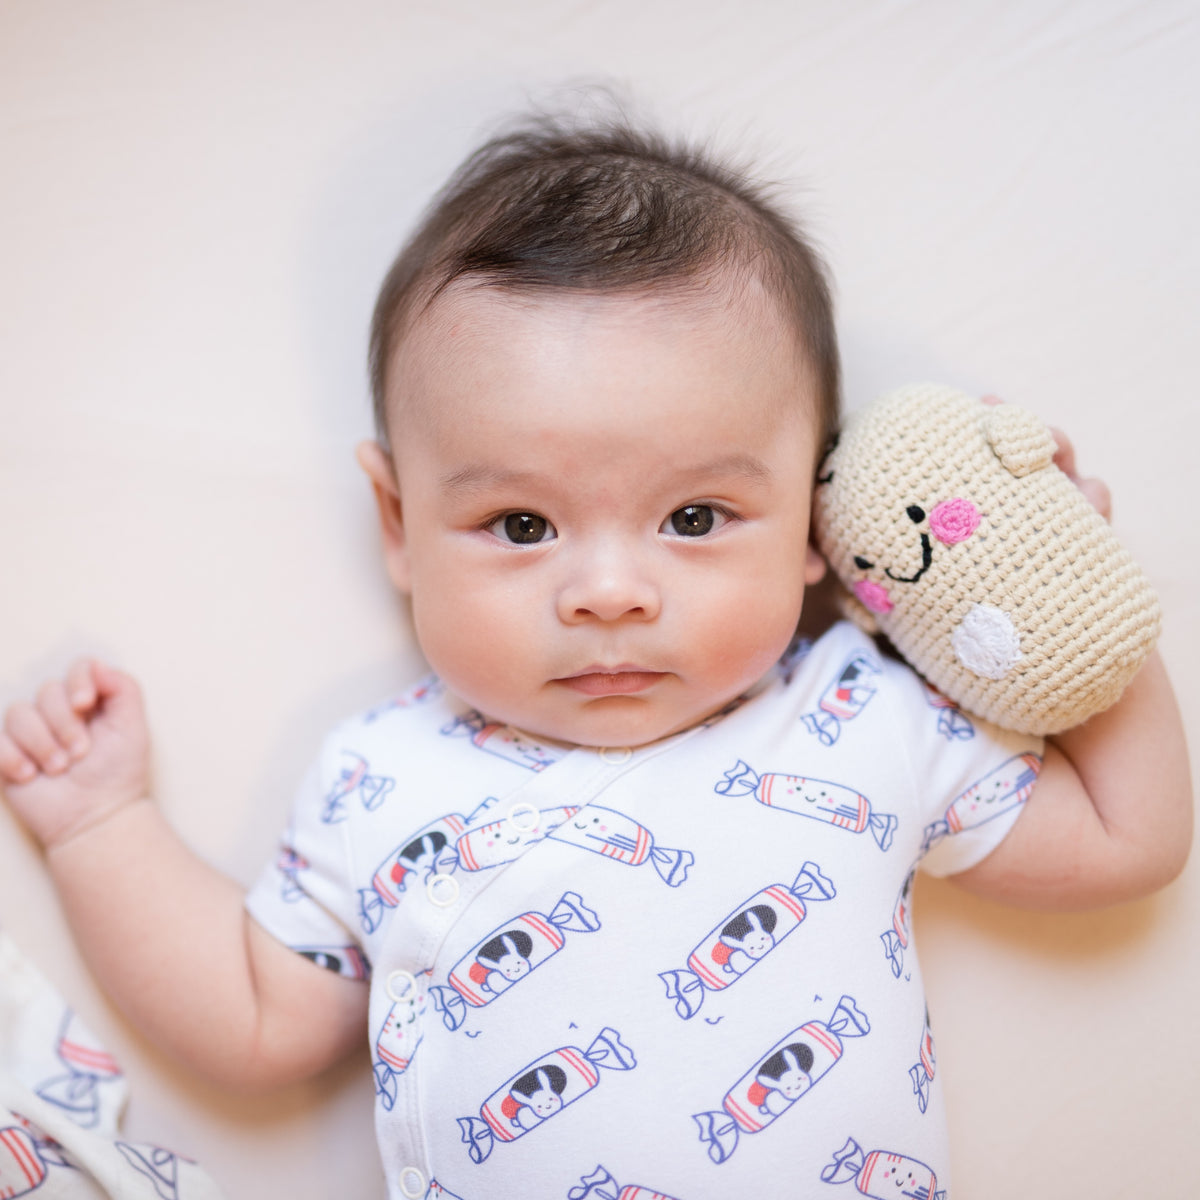 A MUST READ* Organic ? Bunny blogs about We Love Eyes and why baby